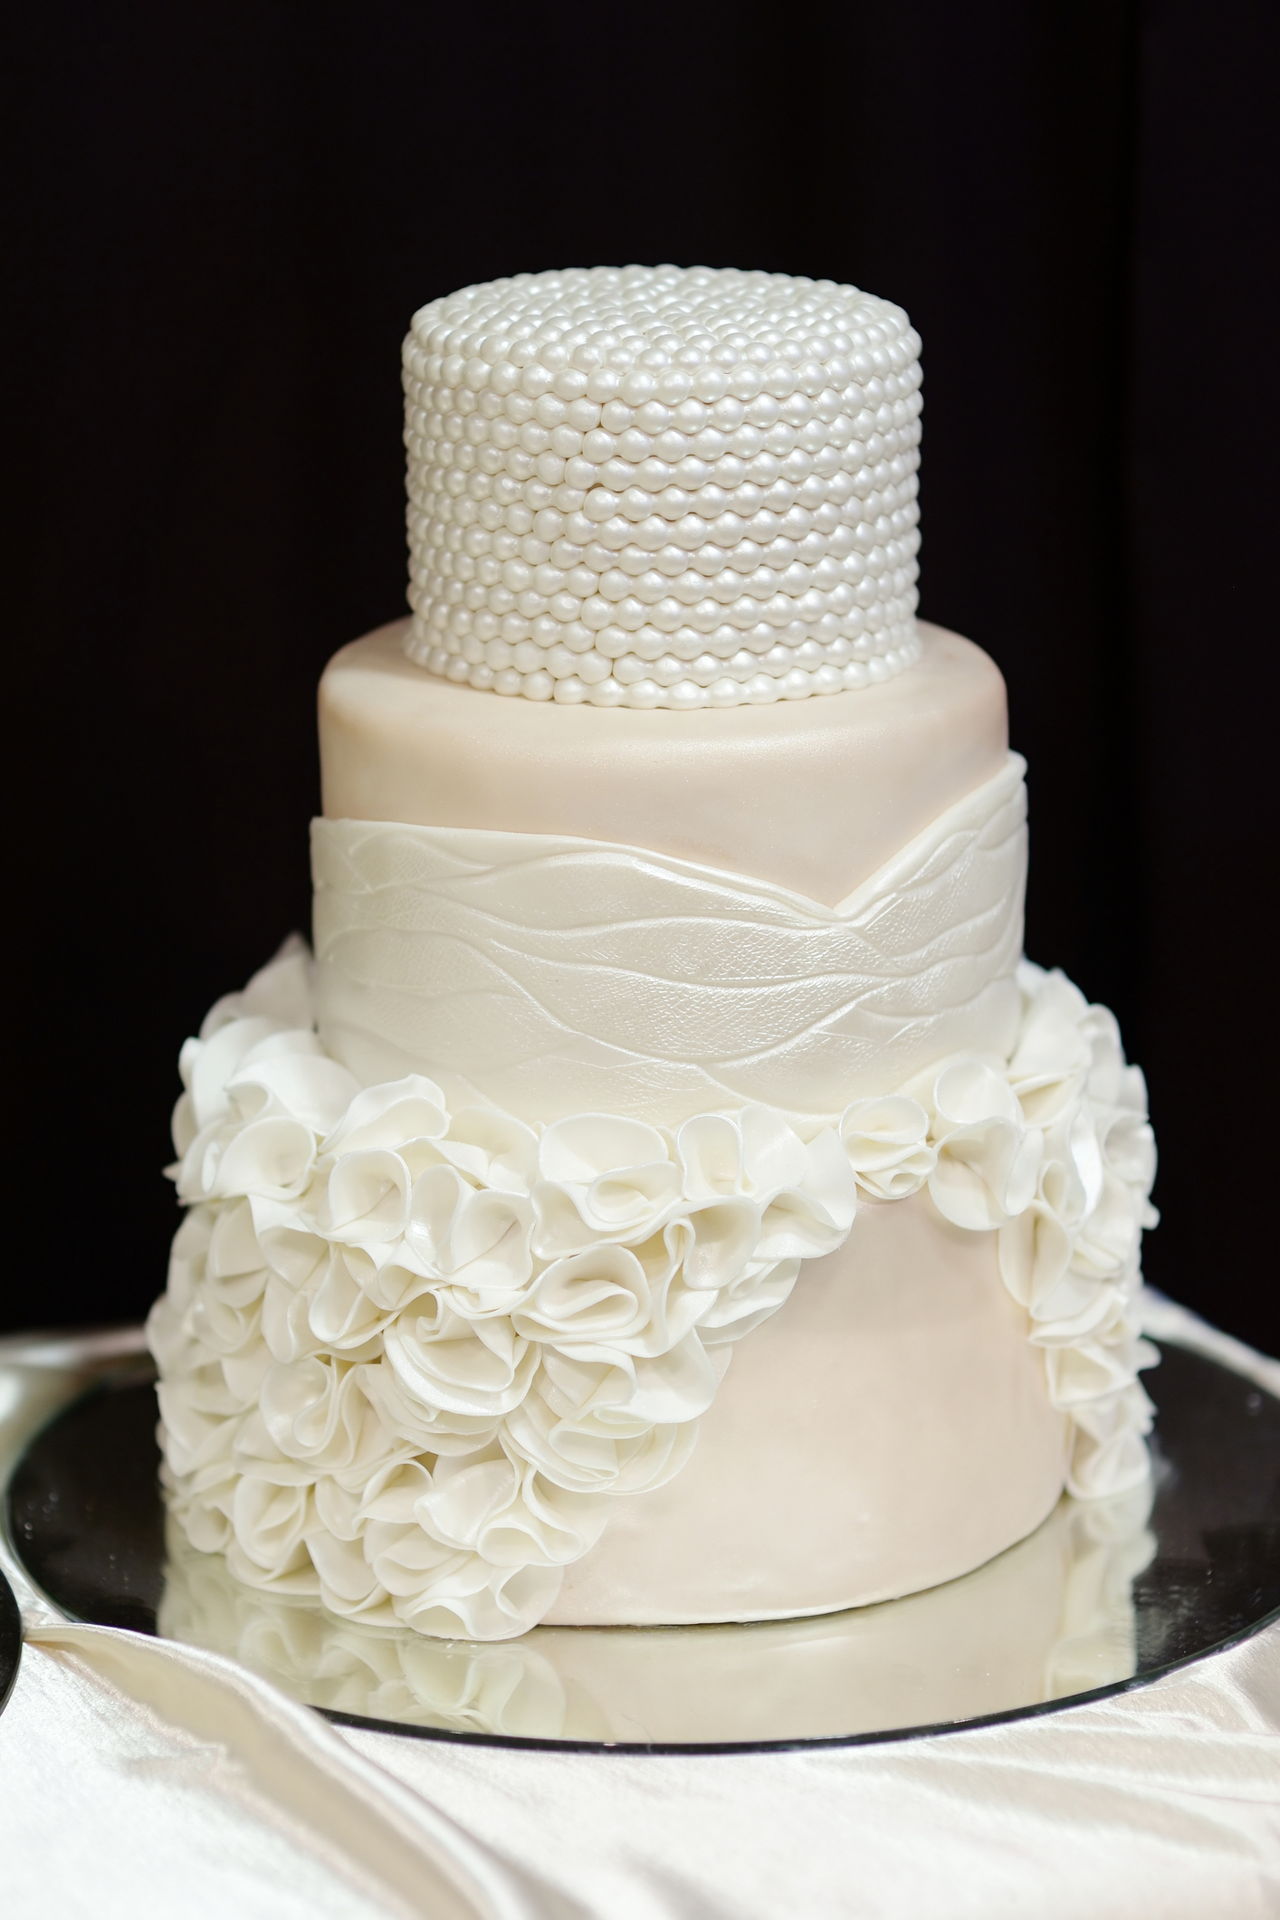 Bake Your Own Wedding Cake From Scratch With These Great Recipes Wedessence 